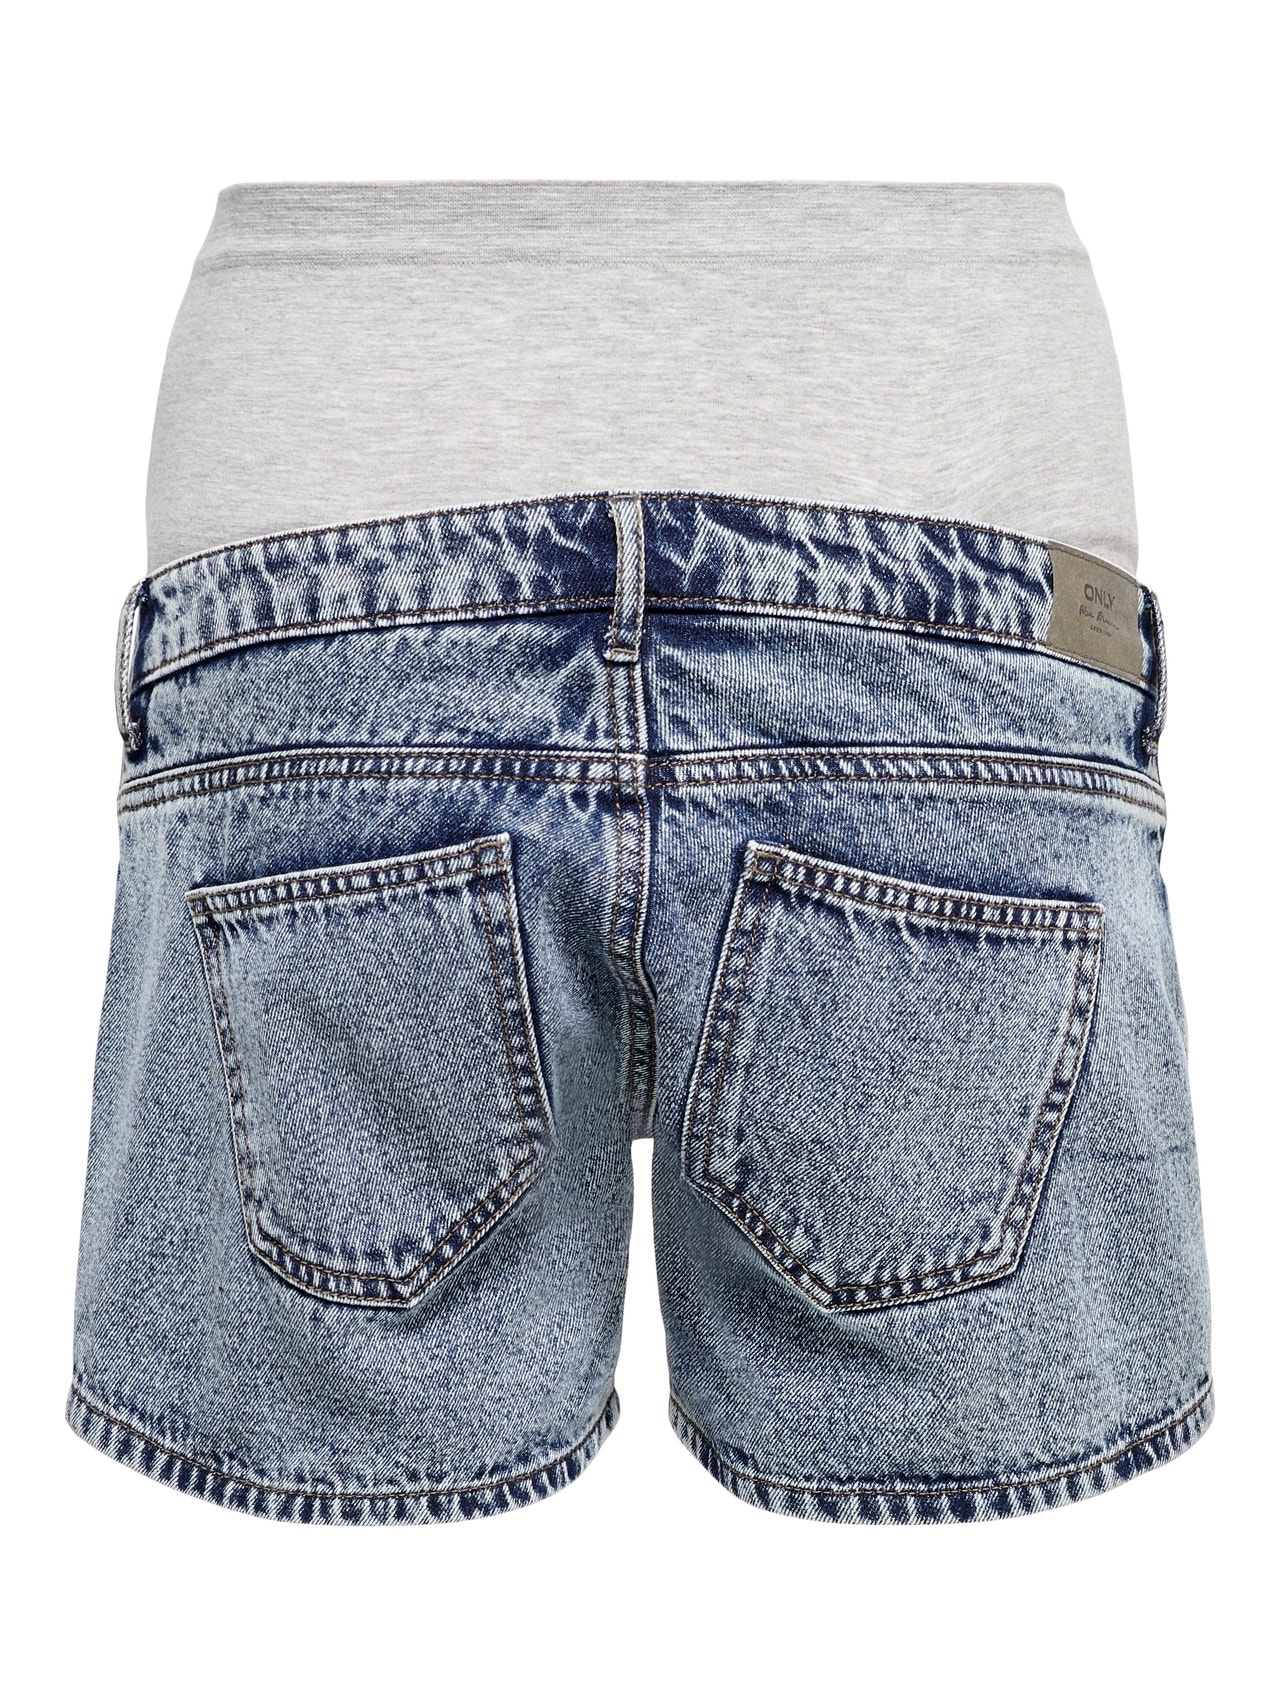 ONLY Hohe Taille Shorts -Light Blue Denim - 15260354